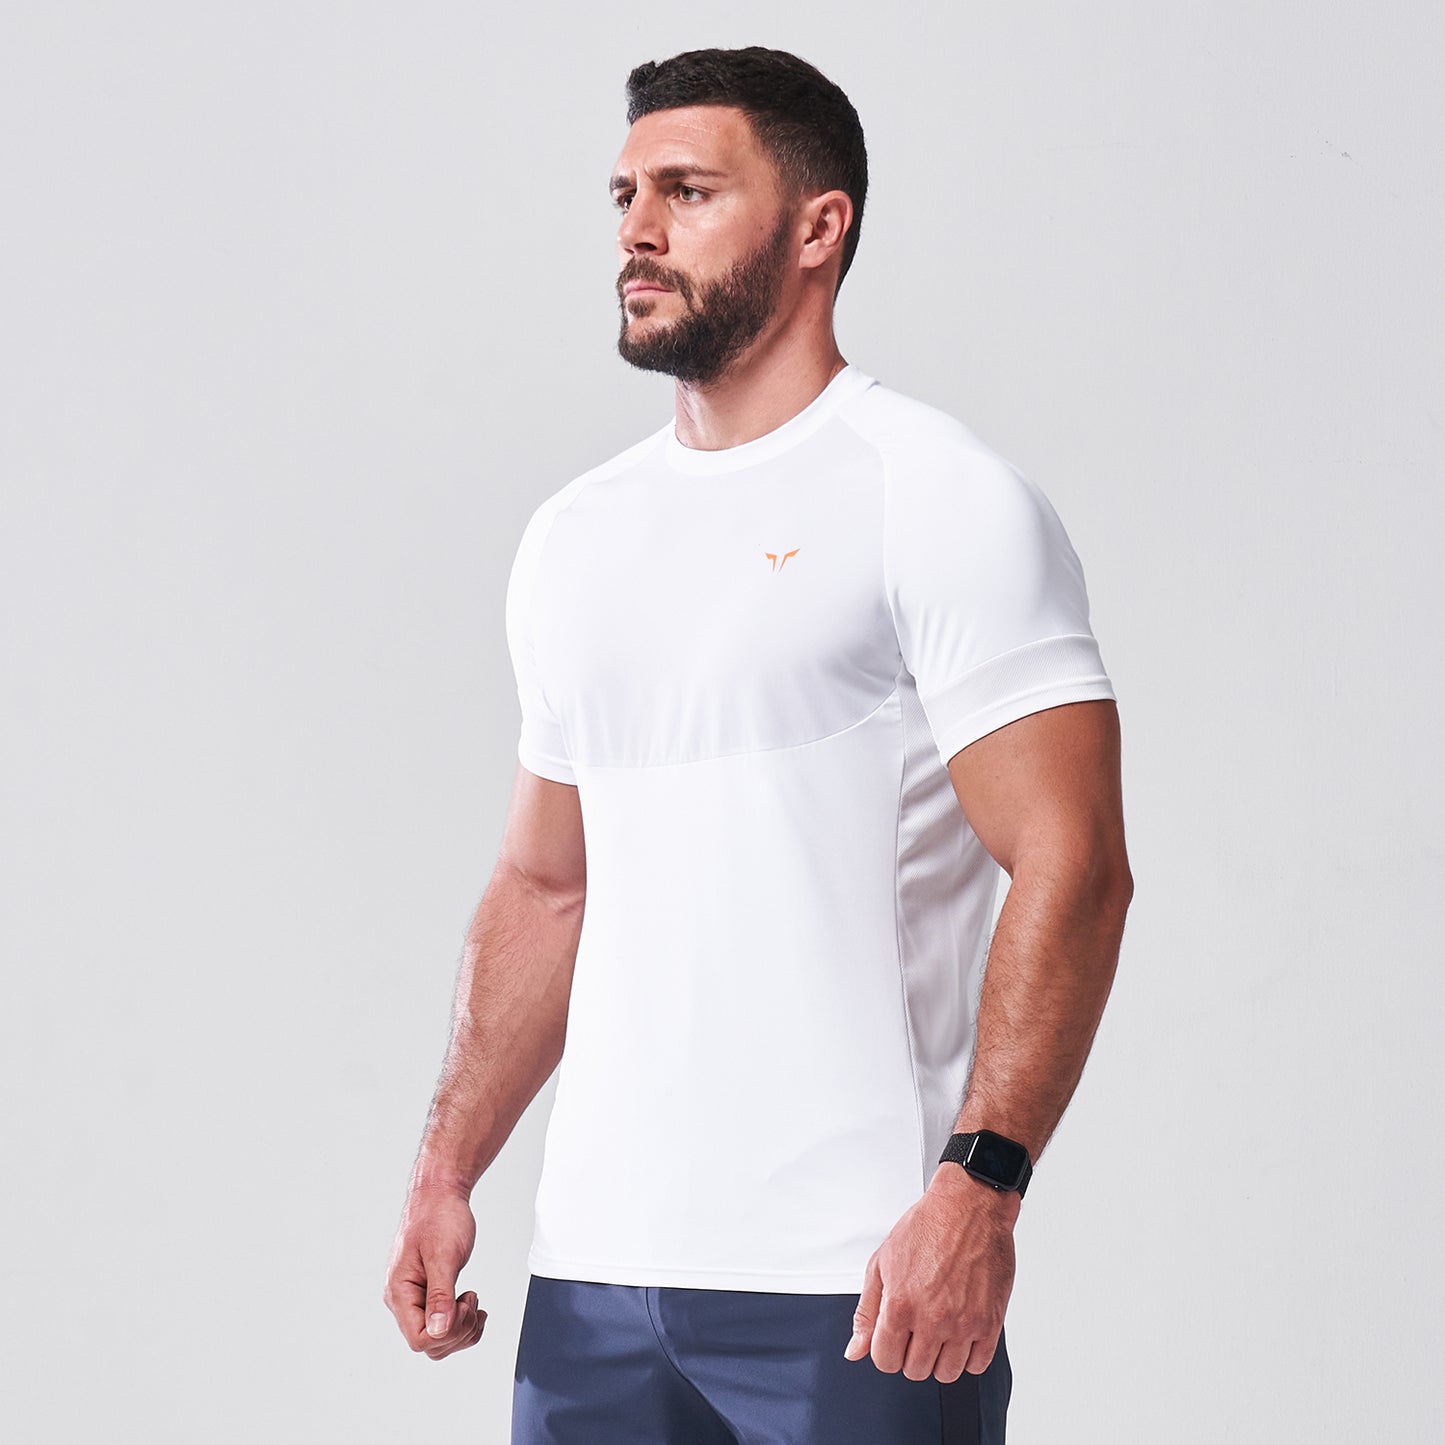 squatwolf-gym-wear-lab360-impact-tee-white-workout-shirts-for-men